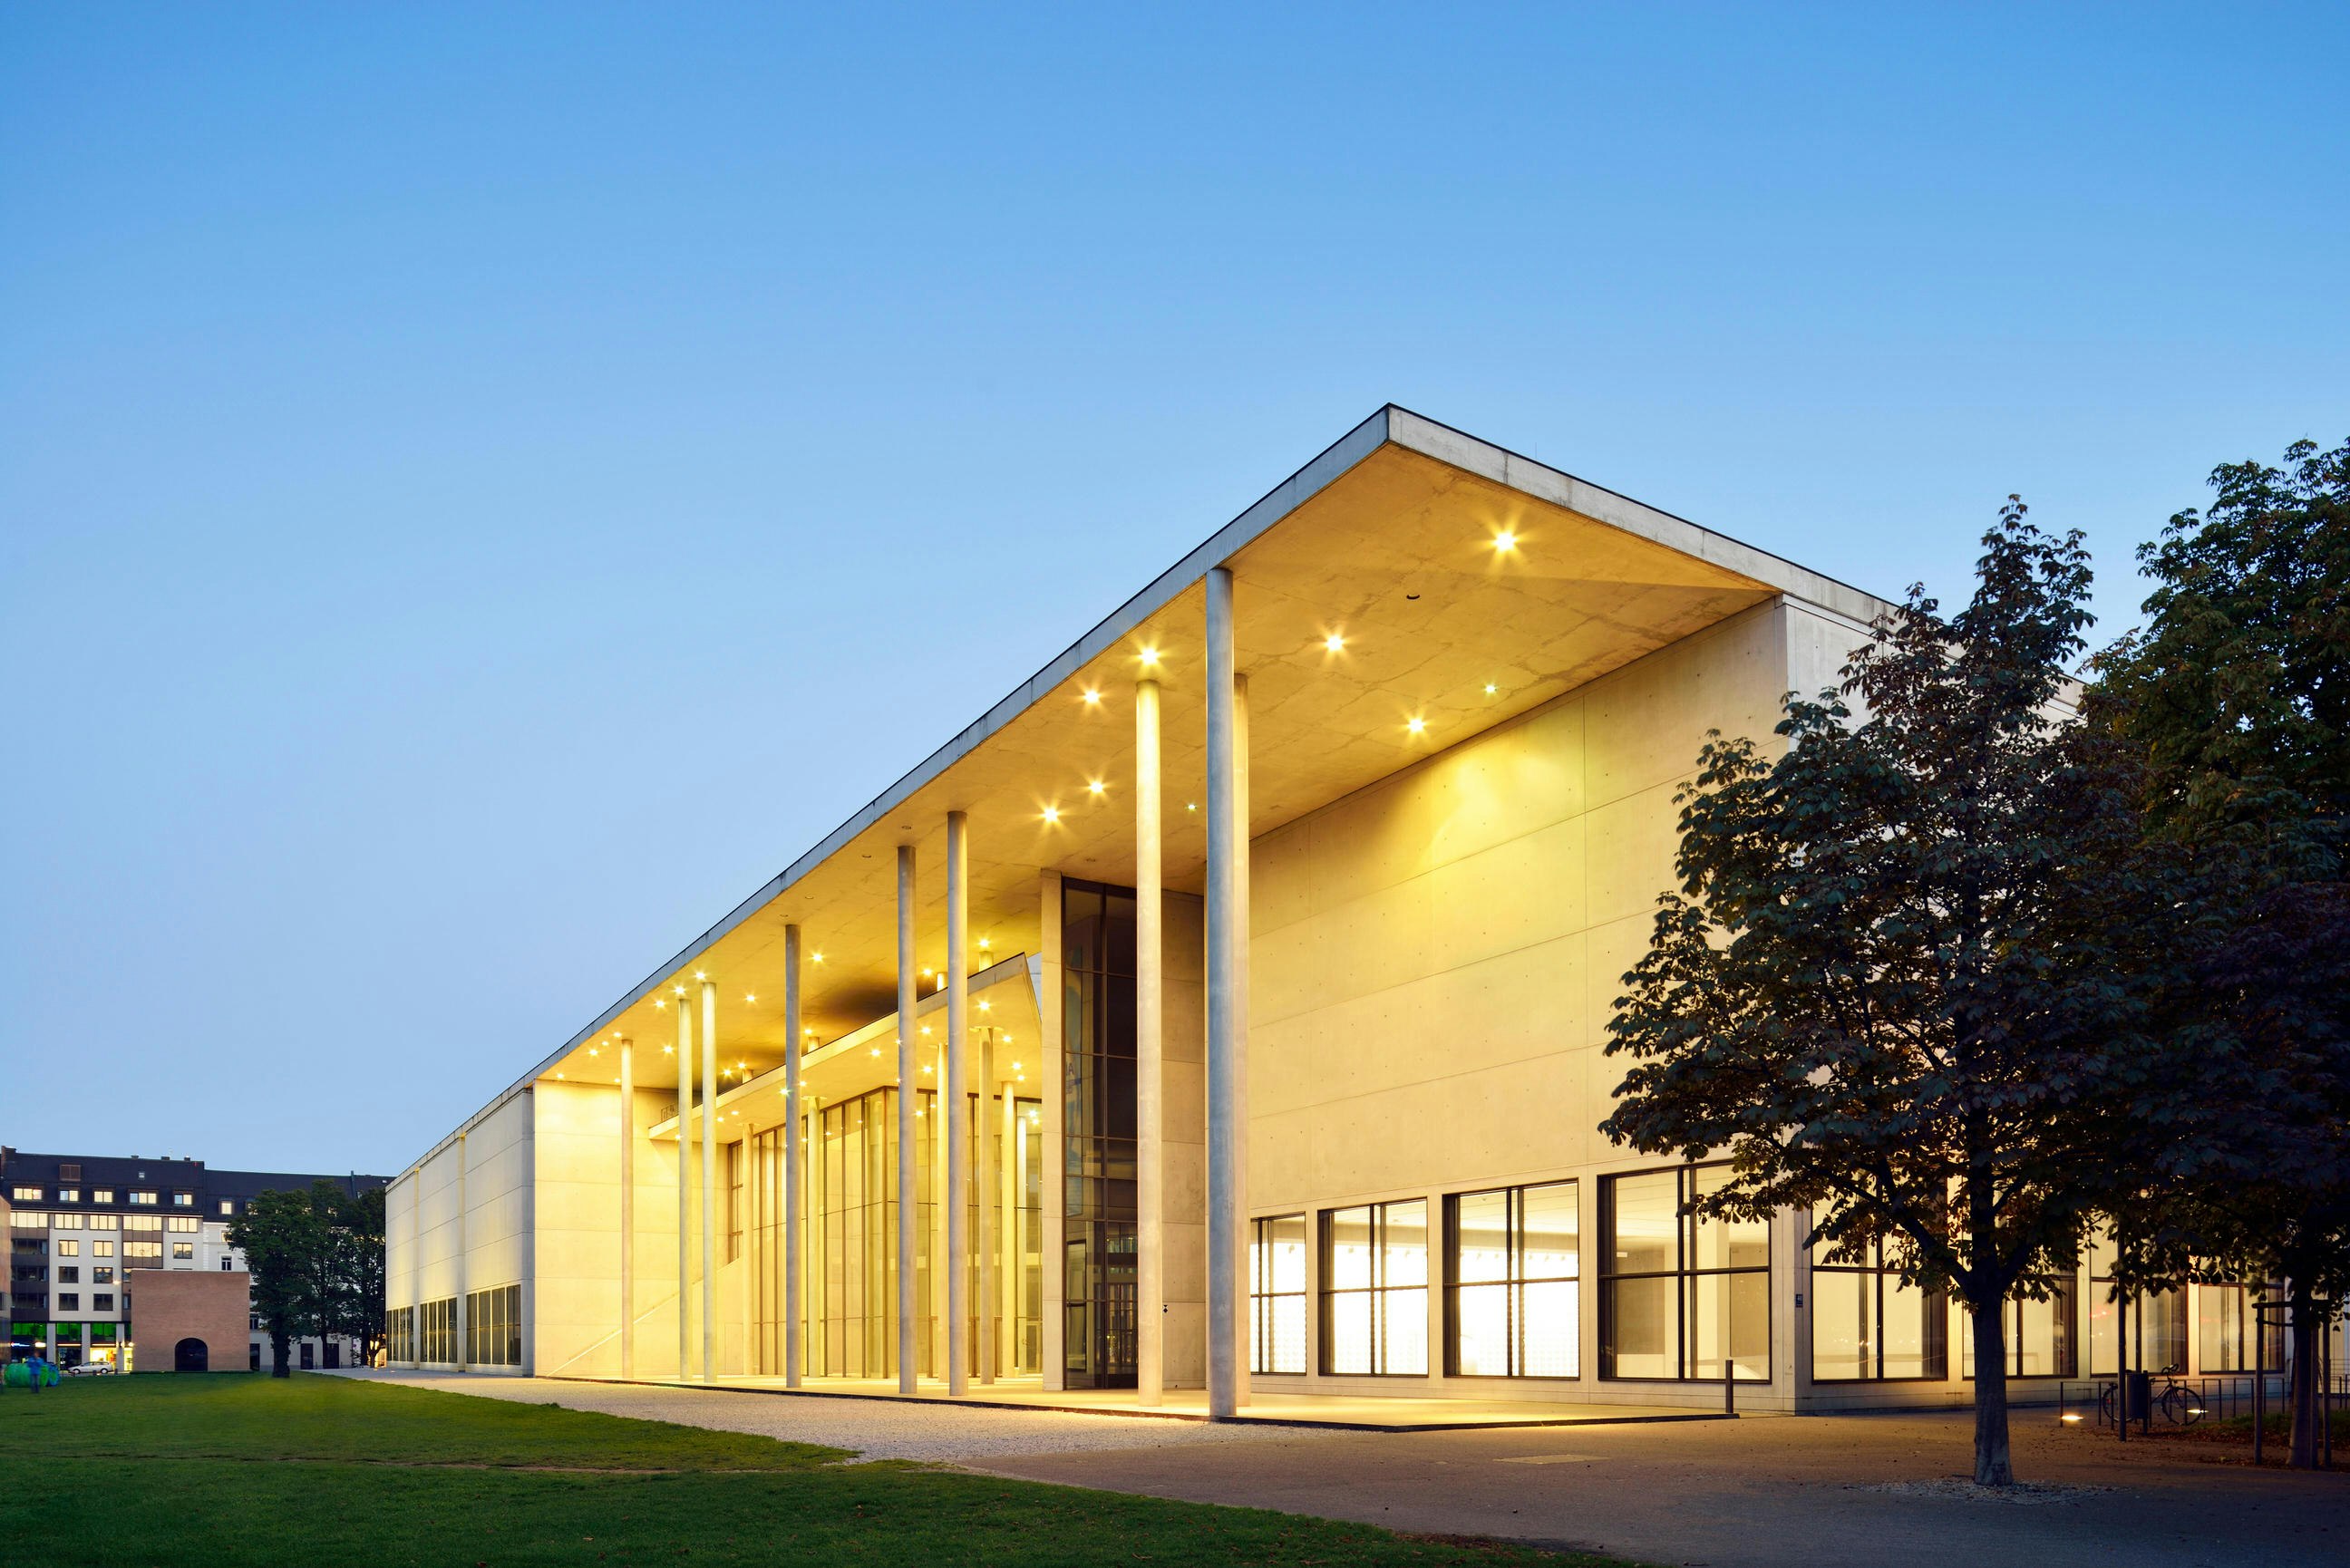 Dusk shot of a vast white modern building with large square windows and thin columns supporting the roof. There are a couple of trees to the left of the building.